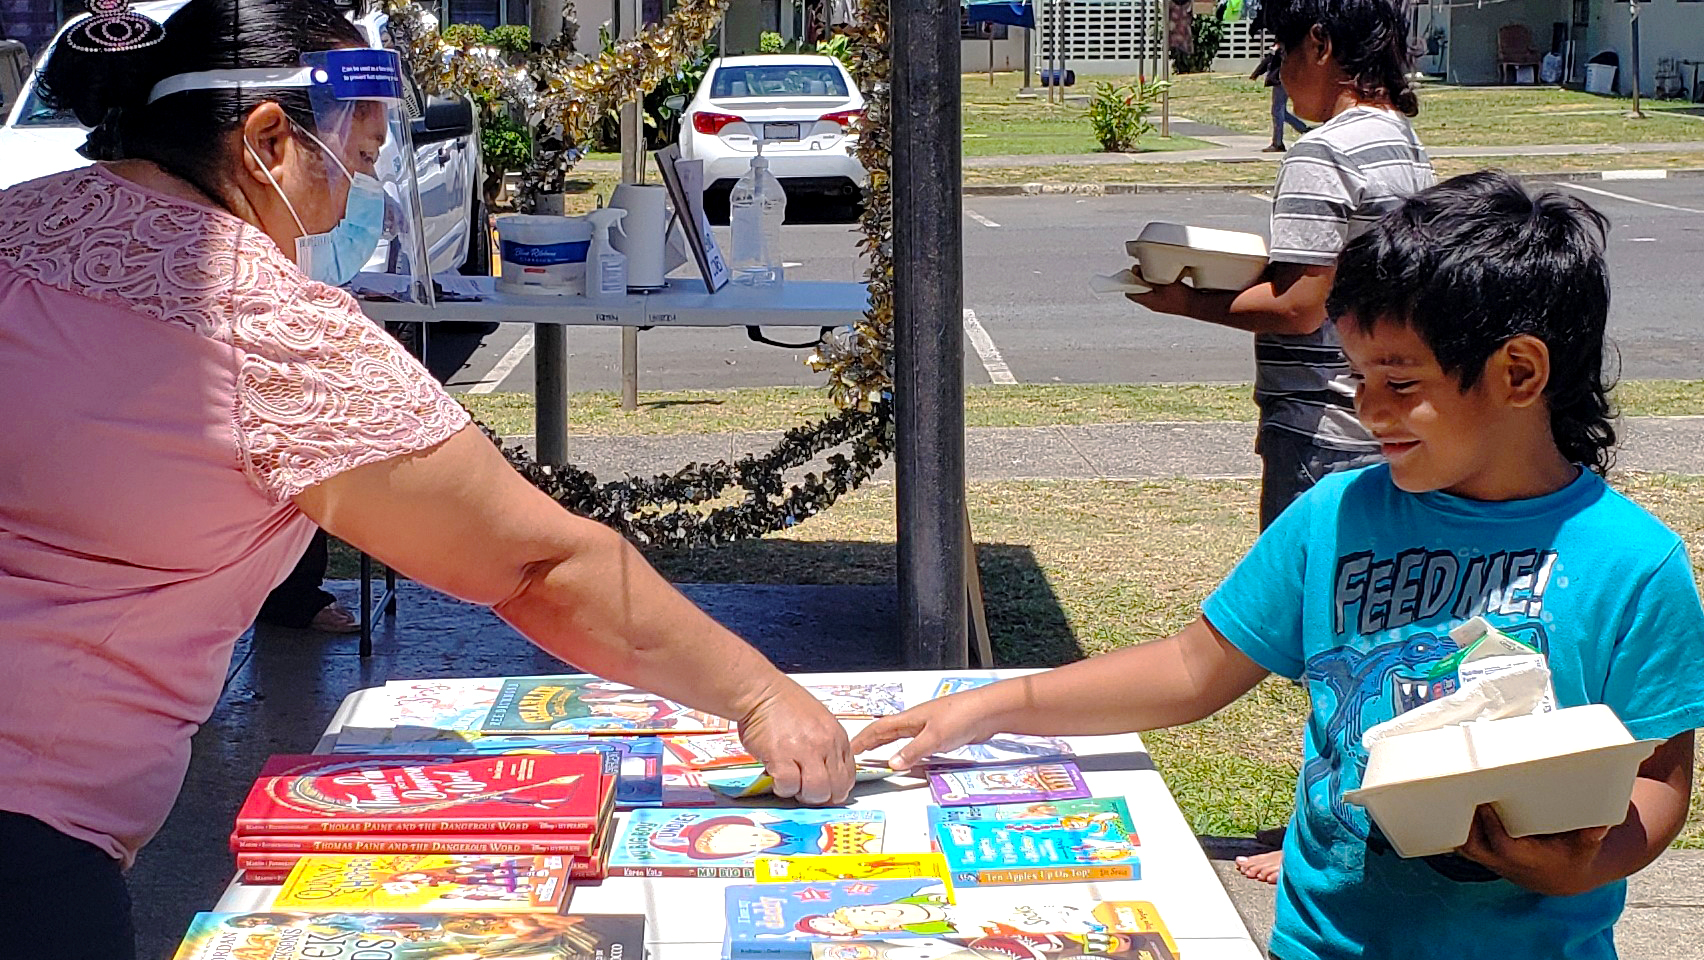 a Hawaii Literacy volunteer hands a book to a young boy during a book drive event